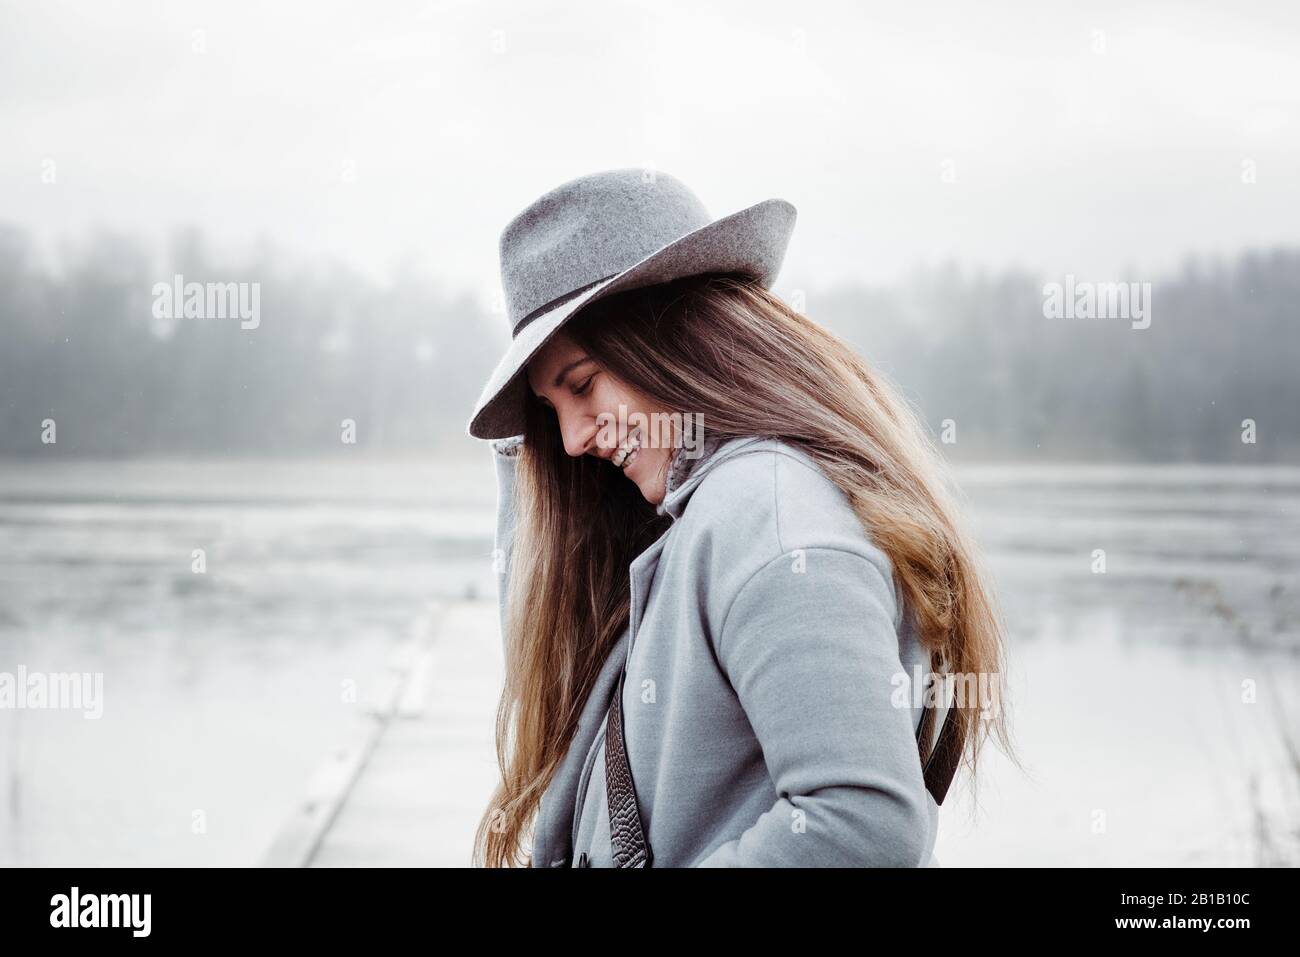 profile of a woman with long brown hair and a hat on laughing smiling Stock Photo